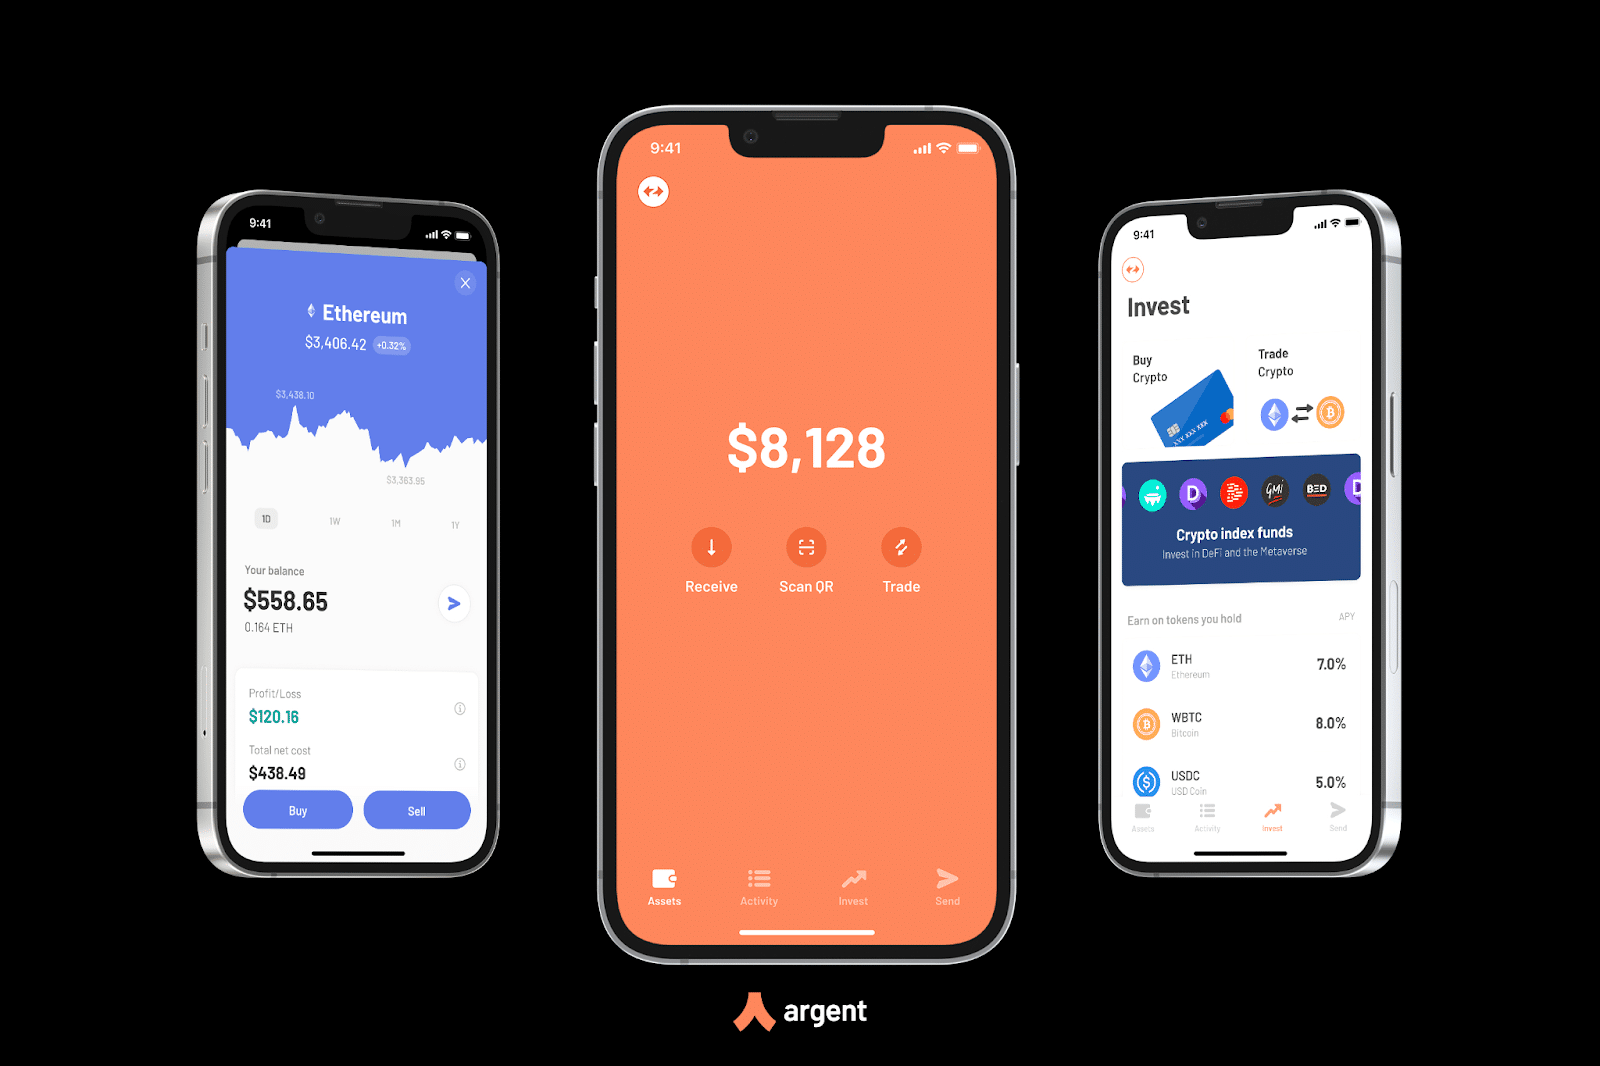 Argent wallet interface.
